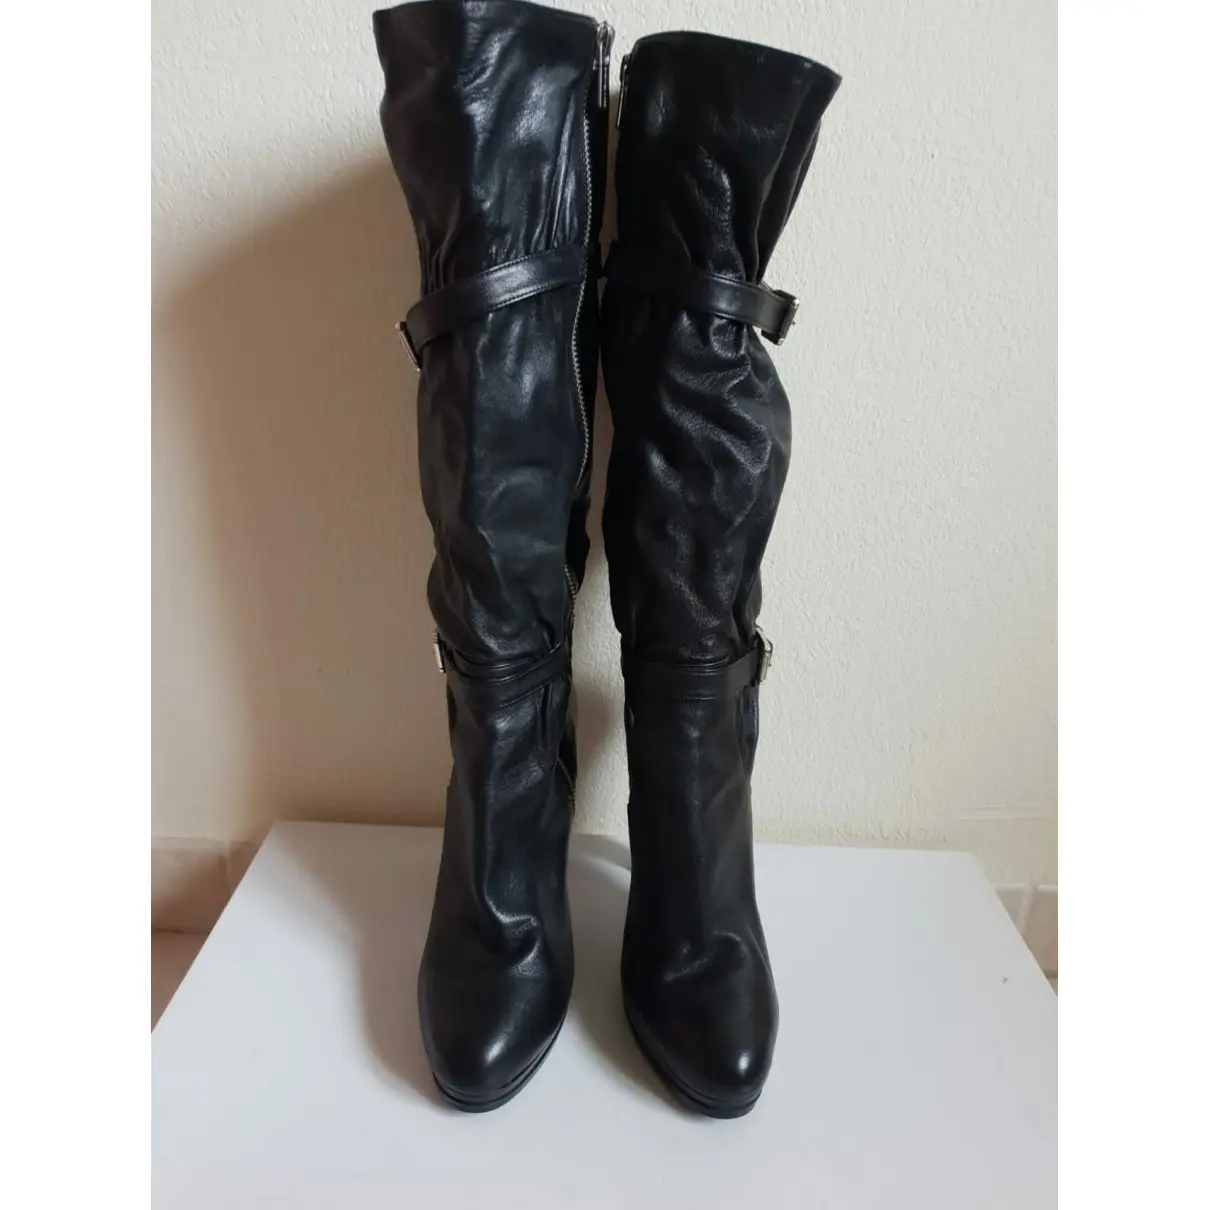 Buy Michael Kors Leather boots online